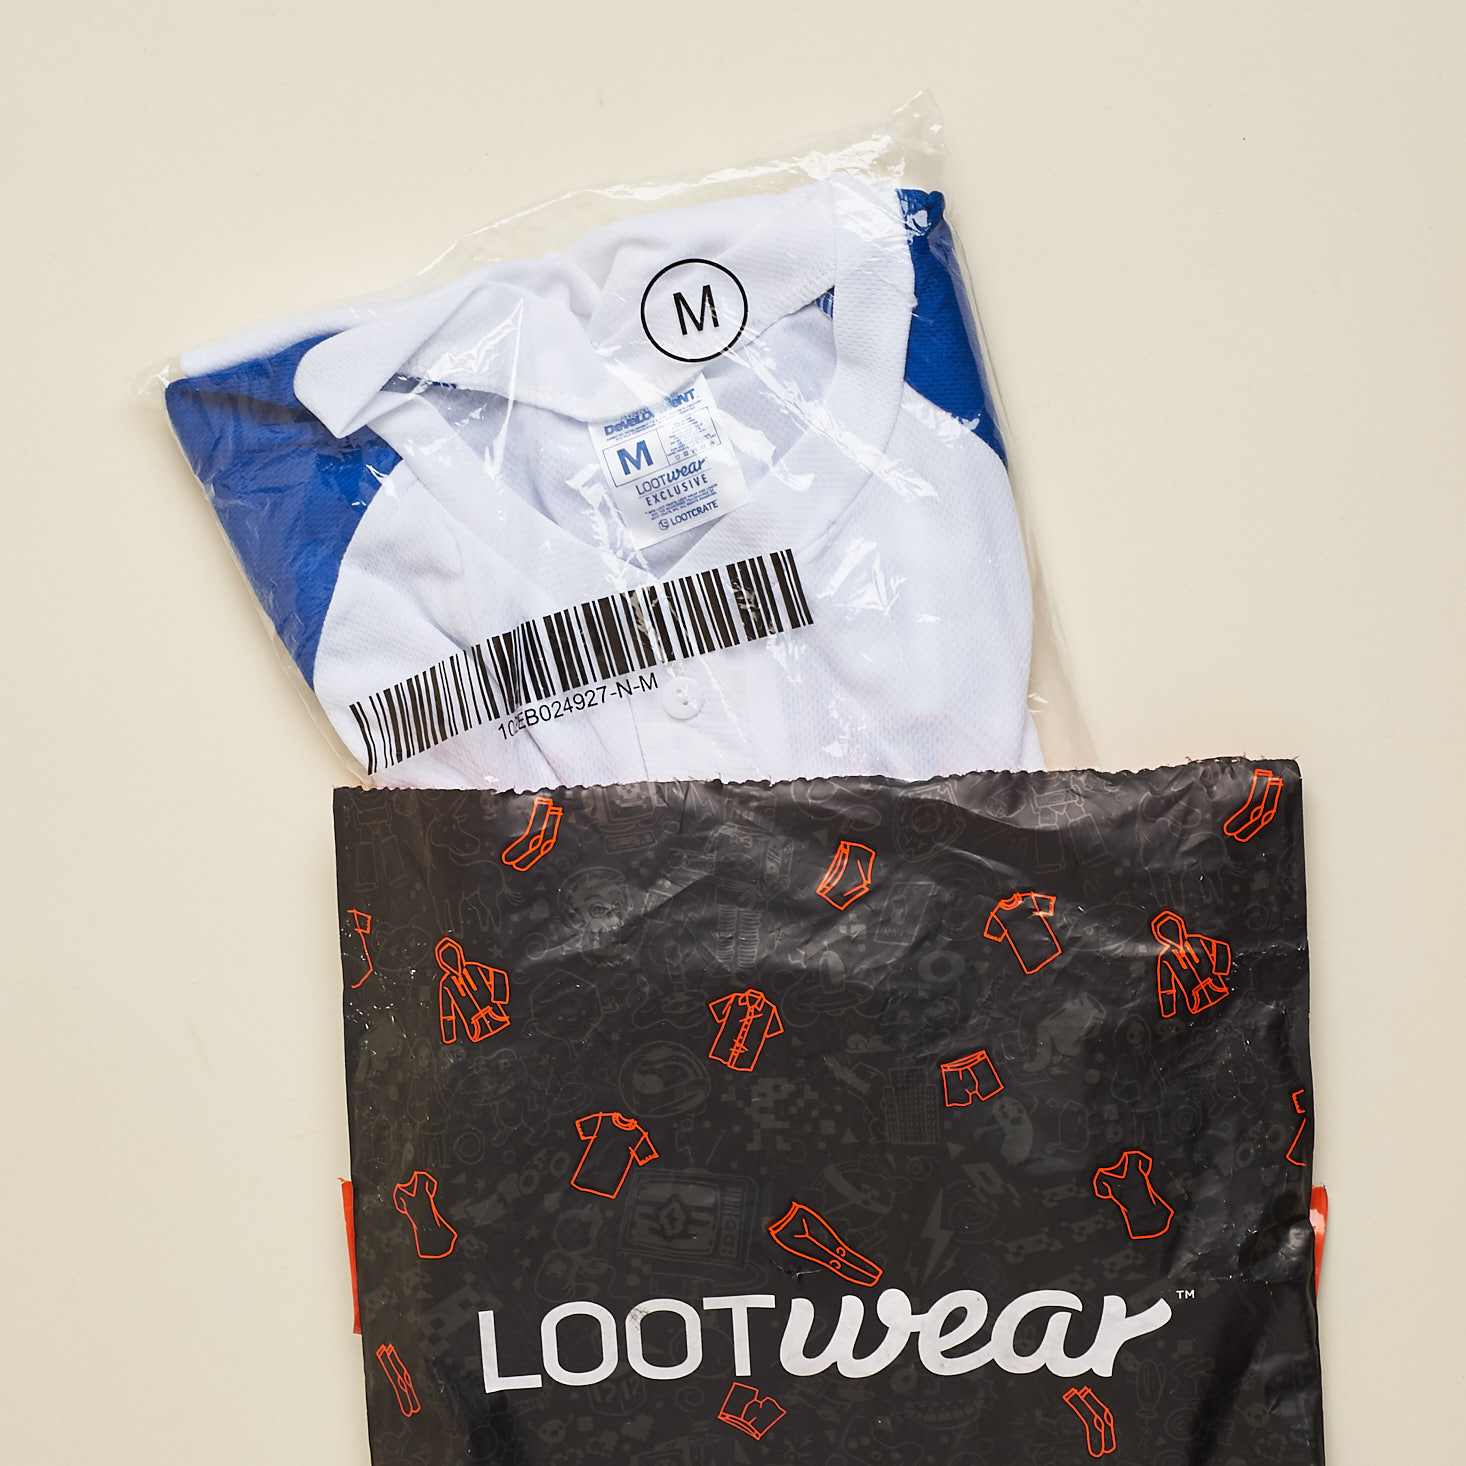 Loot Wearables Subscription by Loot Crate Review + Coupon – May 2018